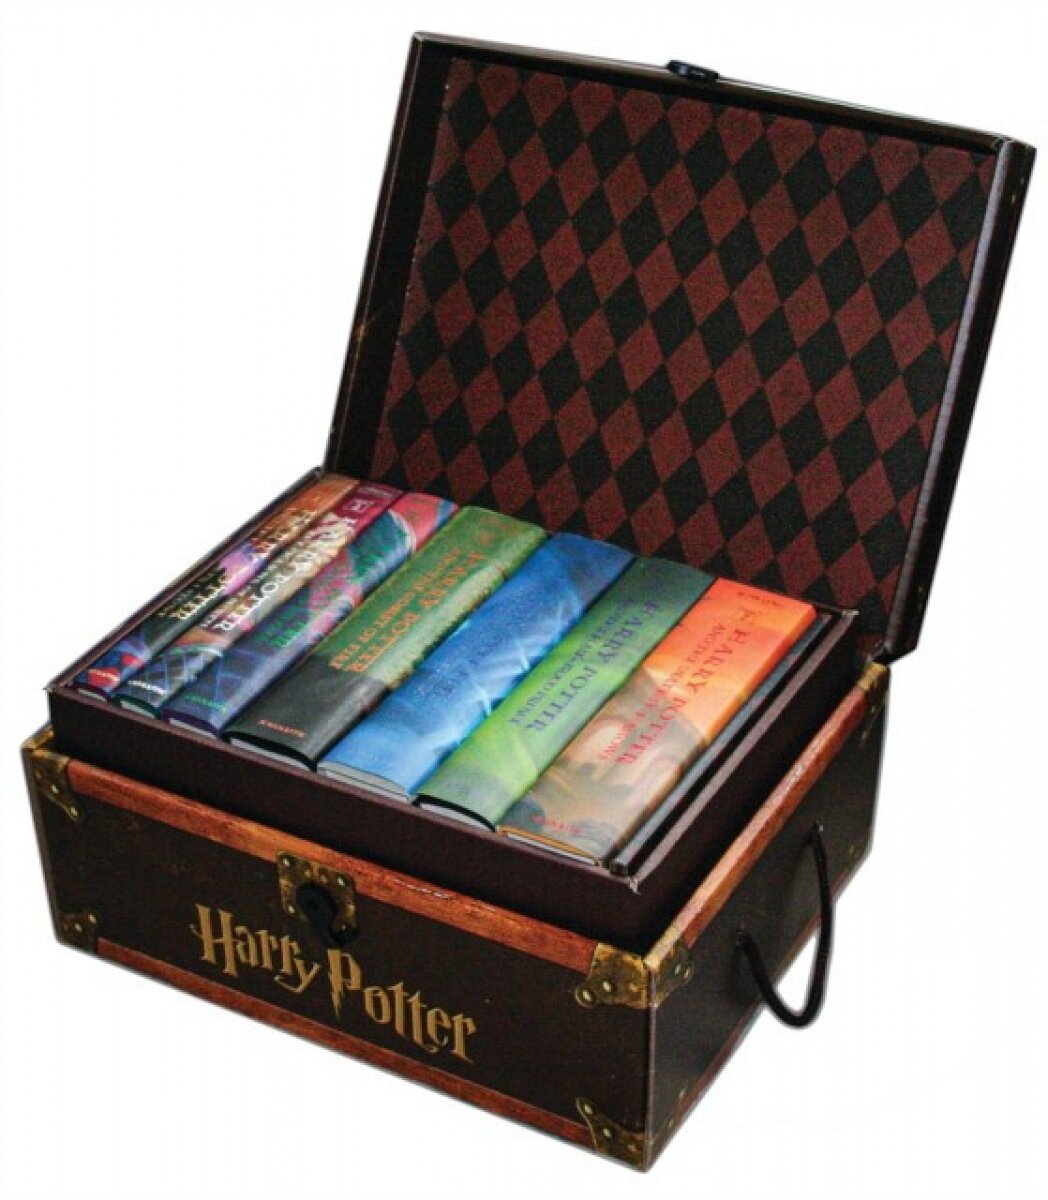 Harry Potter Hard Cover Boxed Set # 1-7 HB